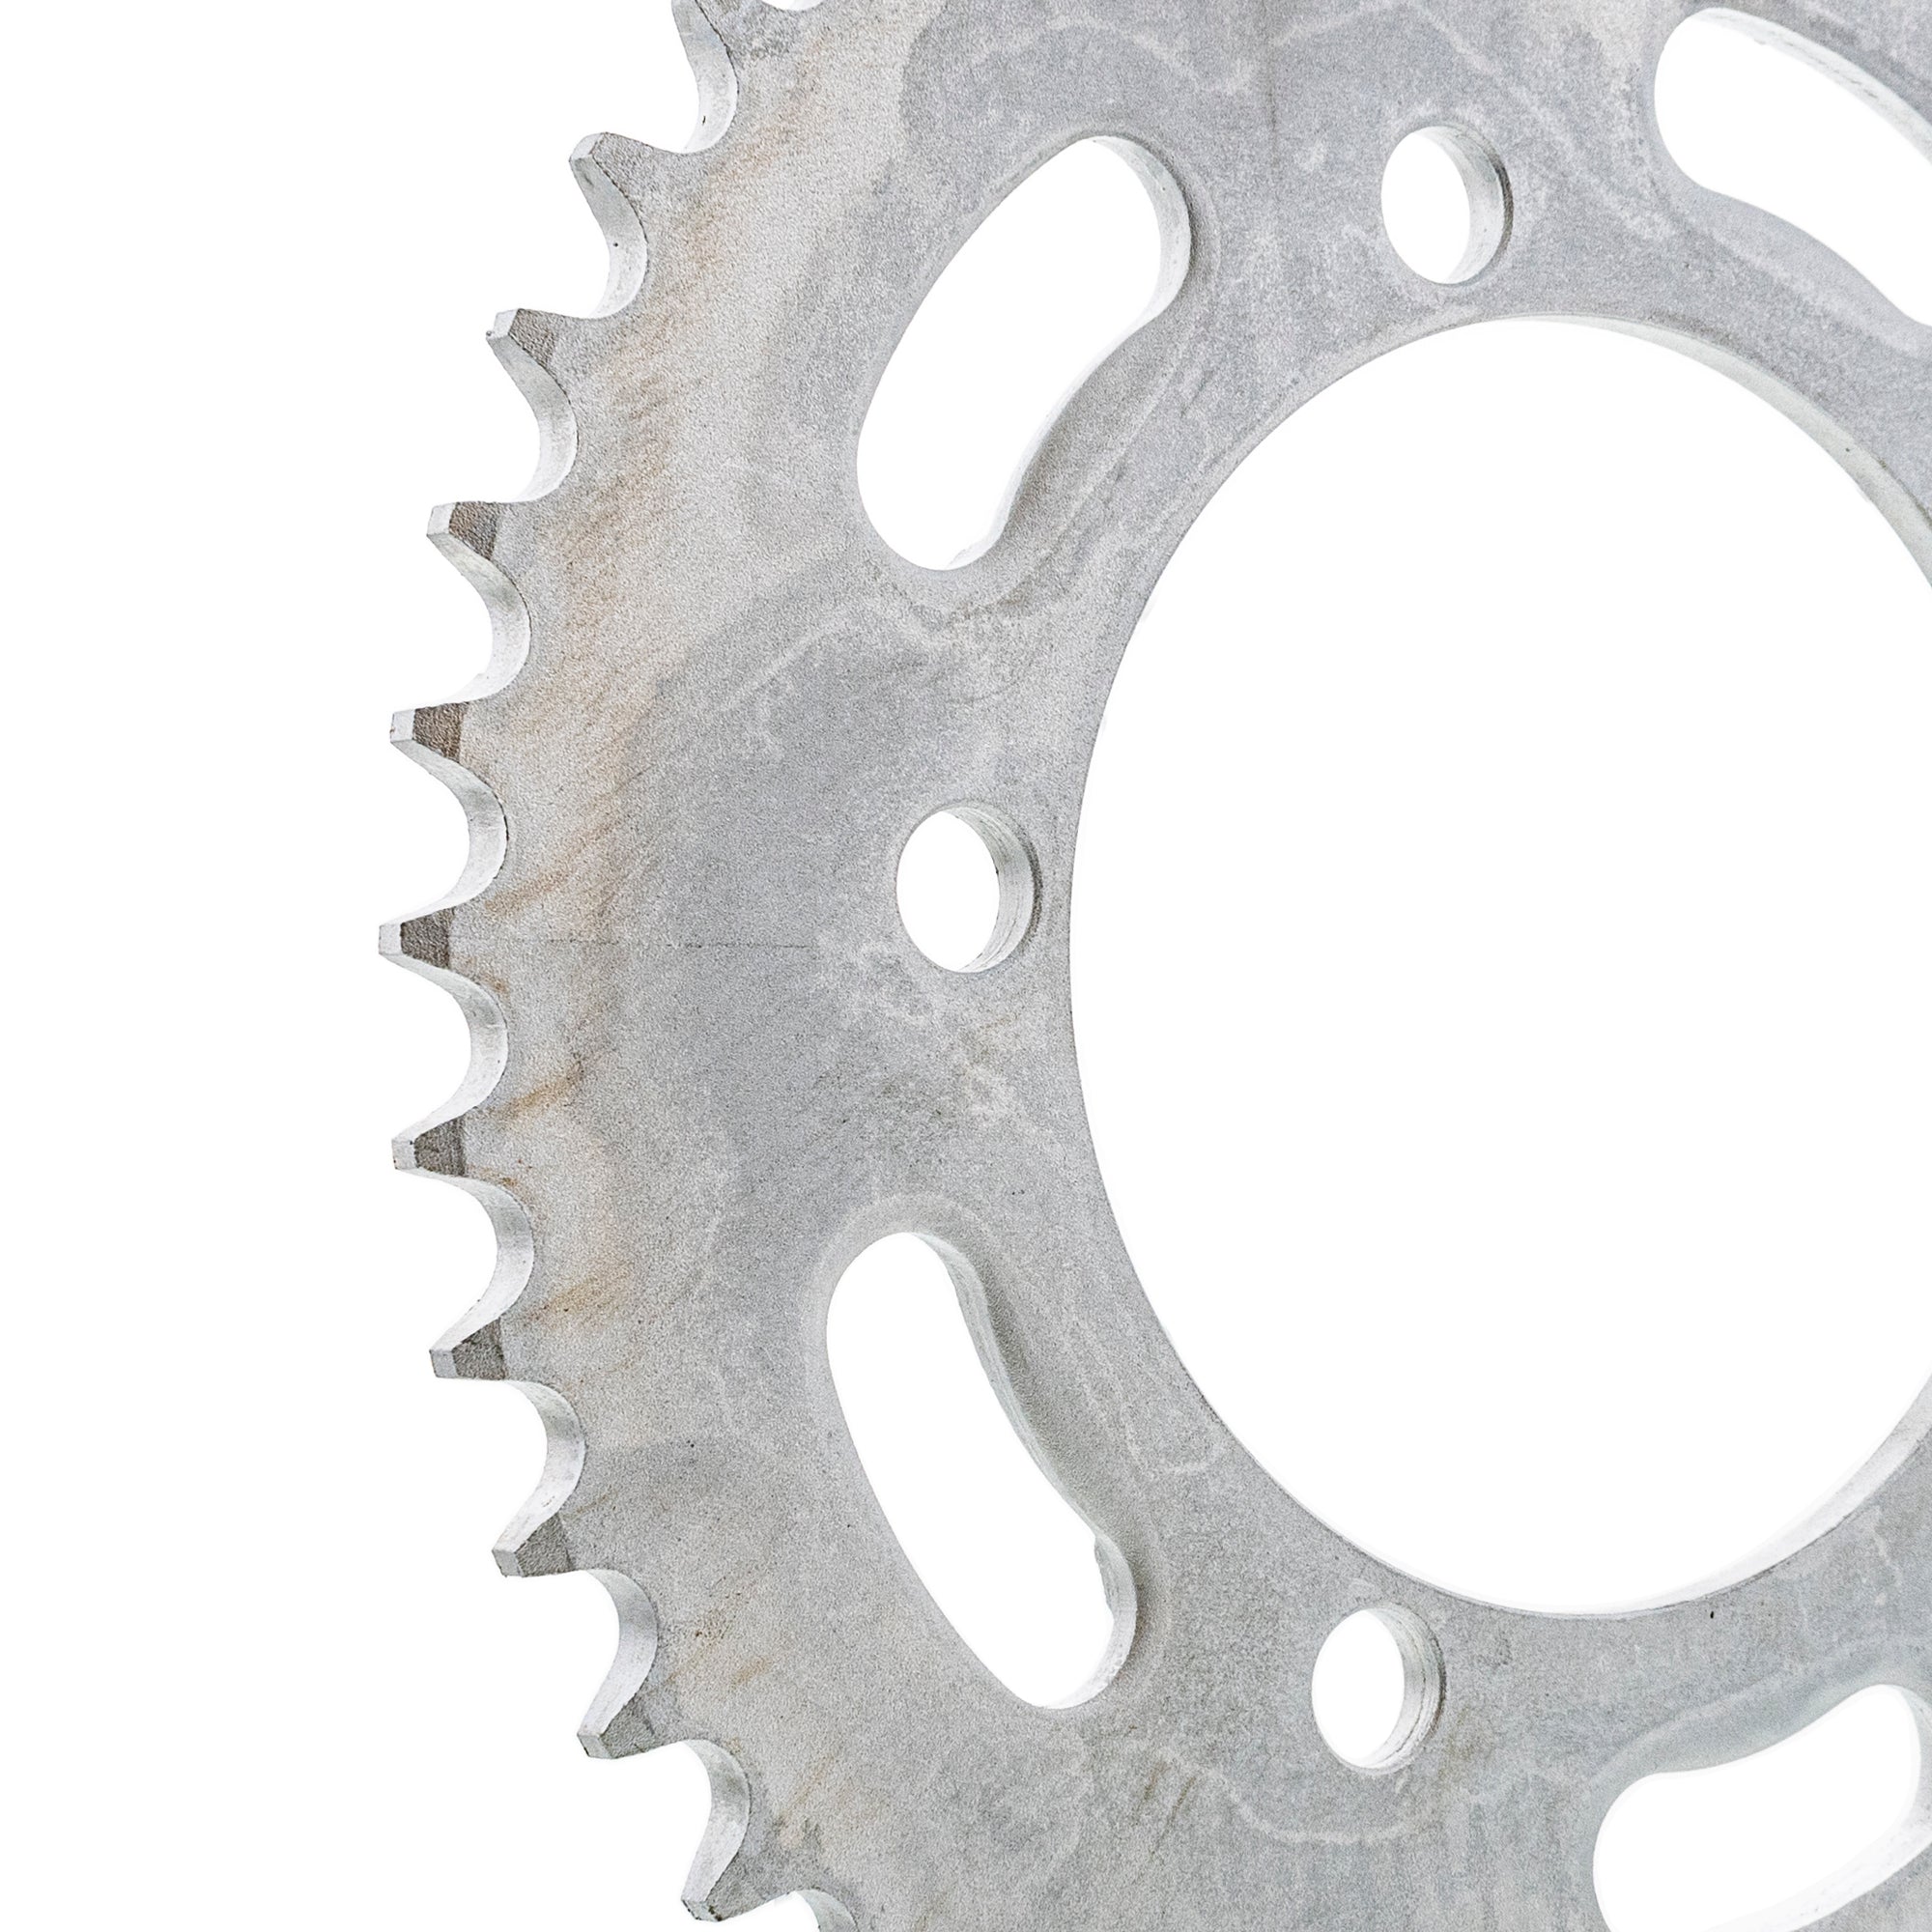 520 Pitch 45 Tooth Rear Drive Sprocket for BMW S1000RR Chain